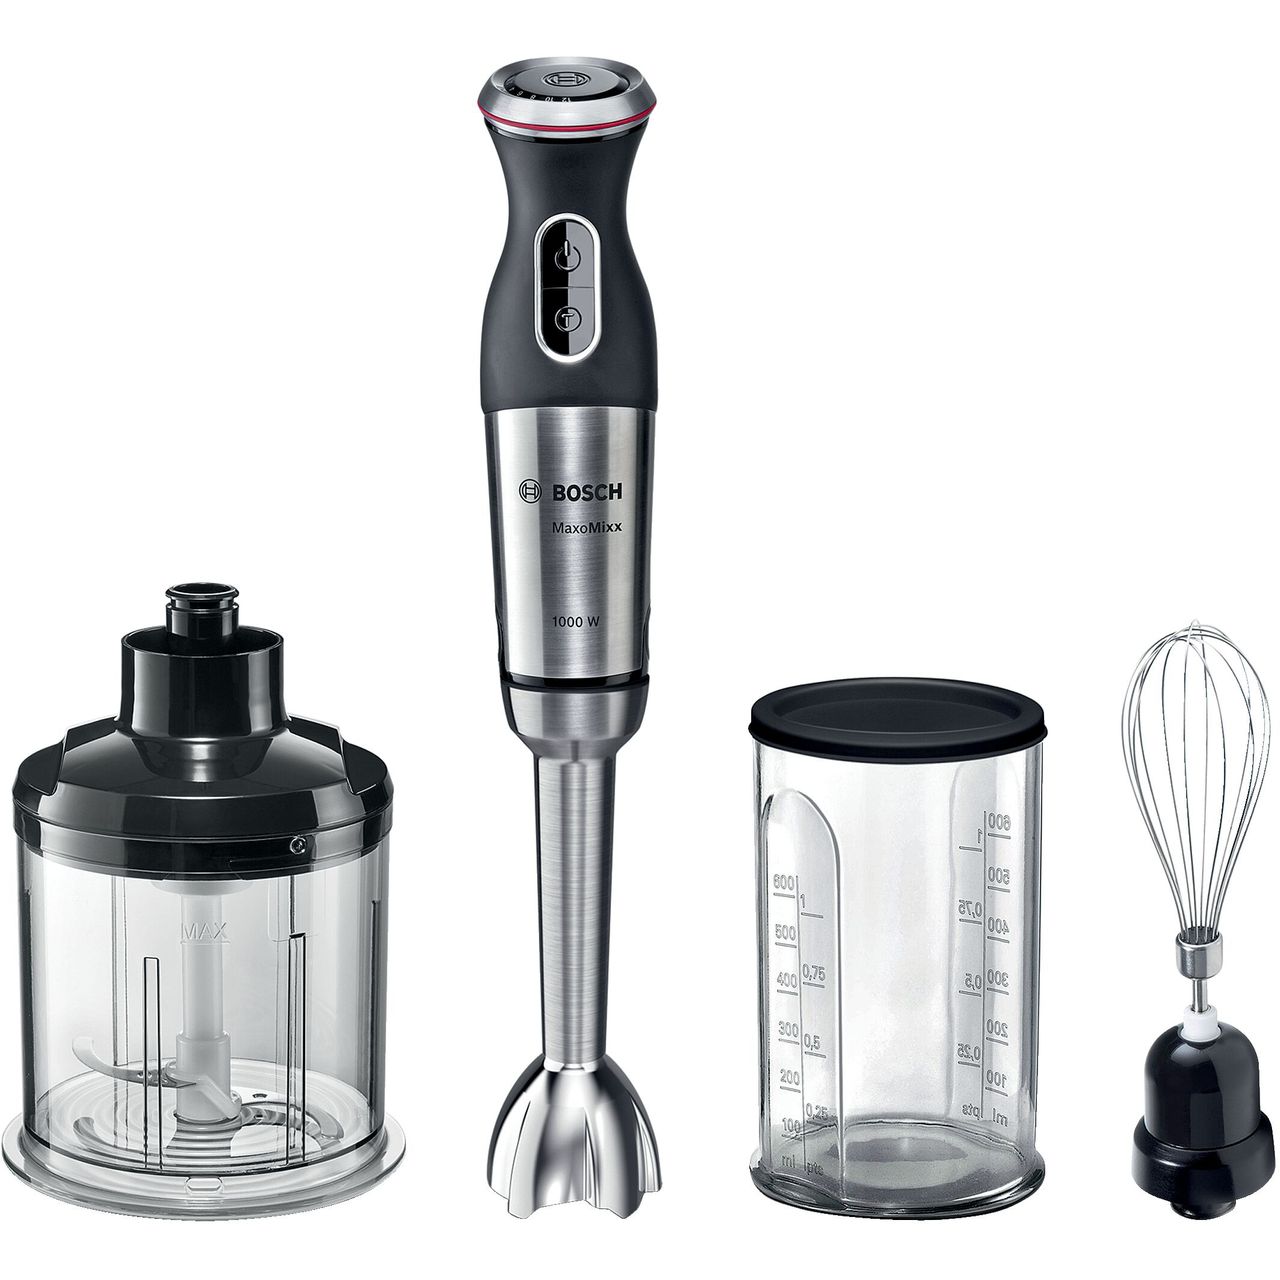 Bosch MaxoMixx MS8CM6160G Hand Blender with 5 Accessories Review